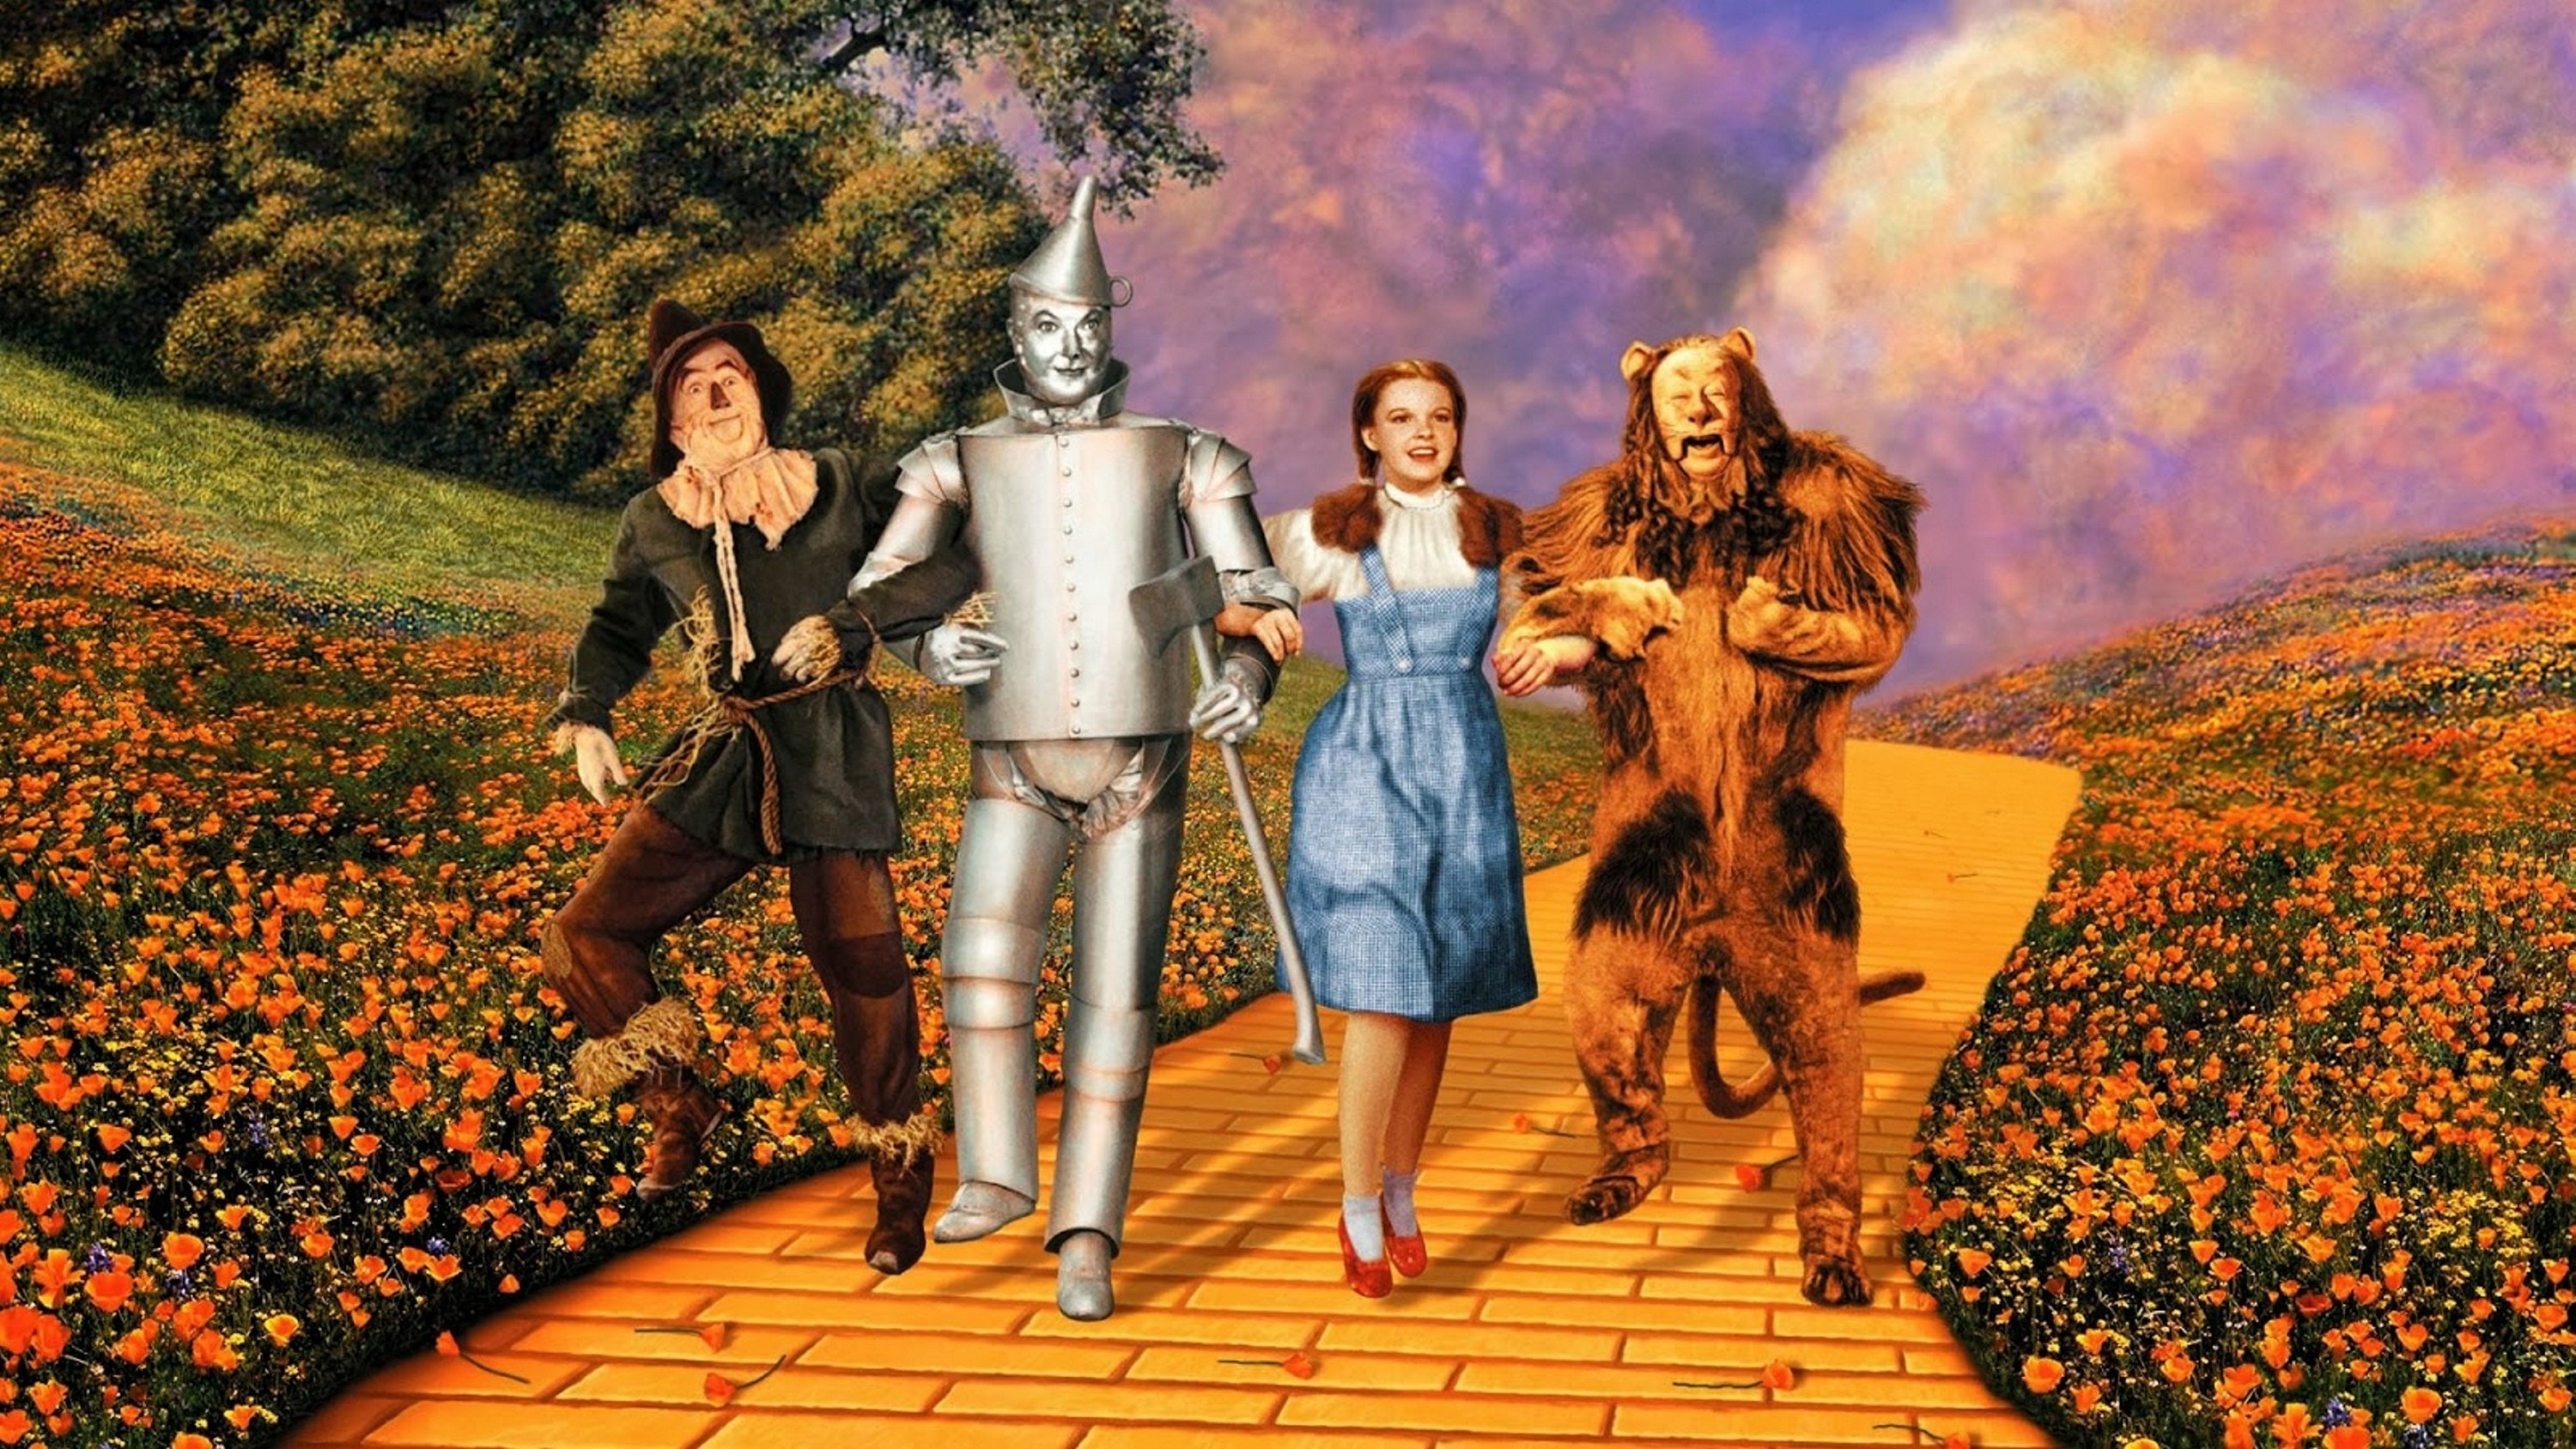 The Scarecrow, Tin Man, Dorothy Gale and the Cowardly Lion walk down the yellow brick road